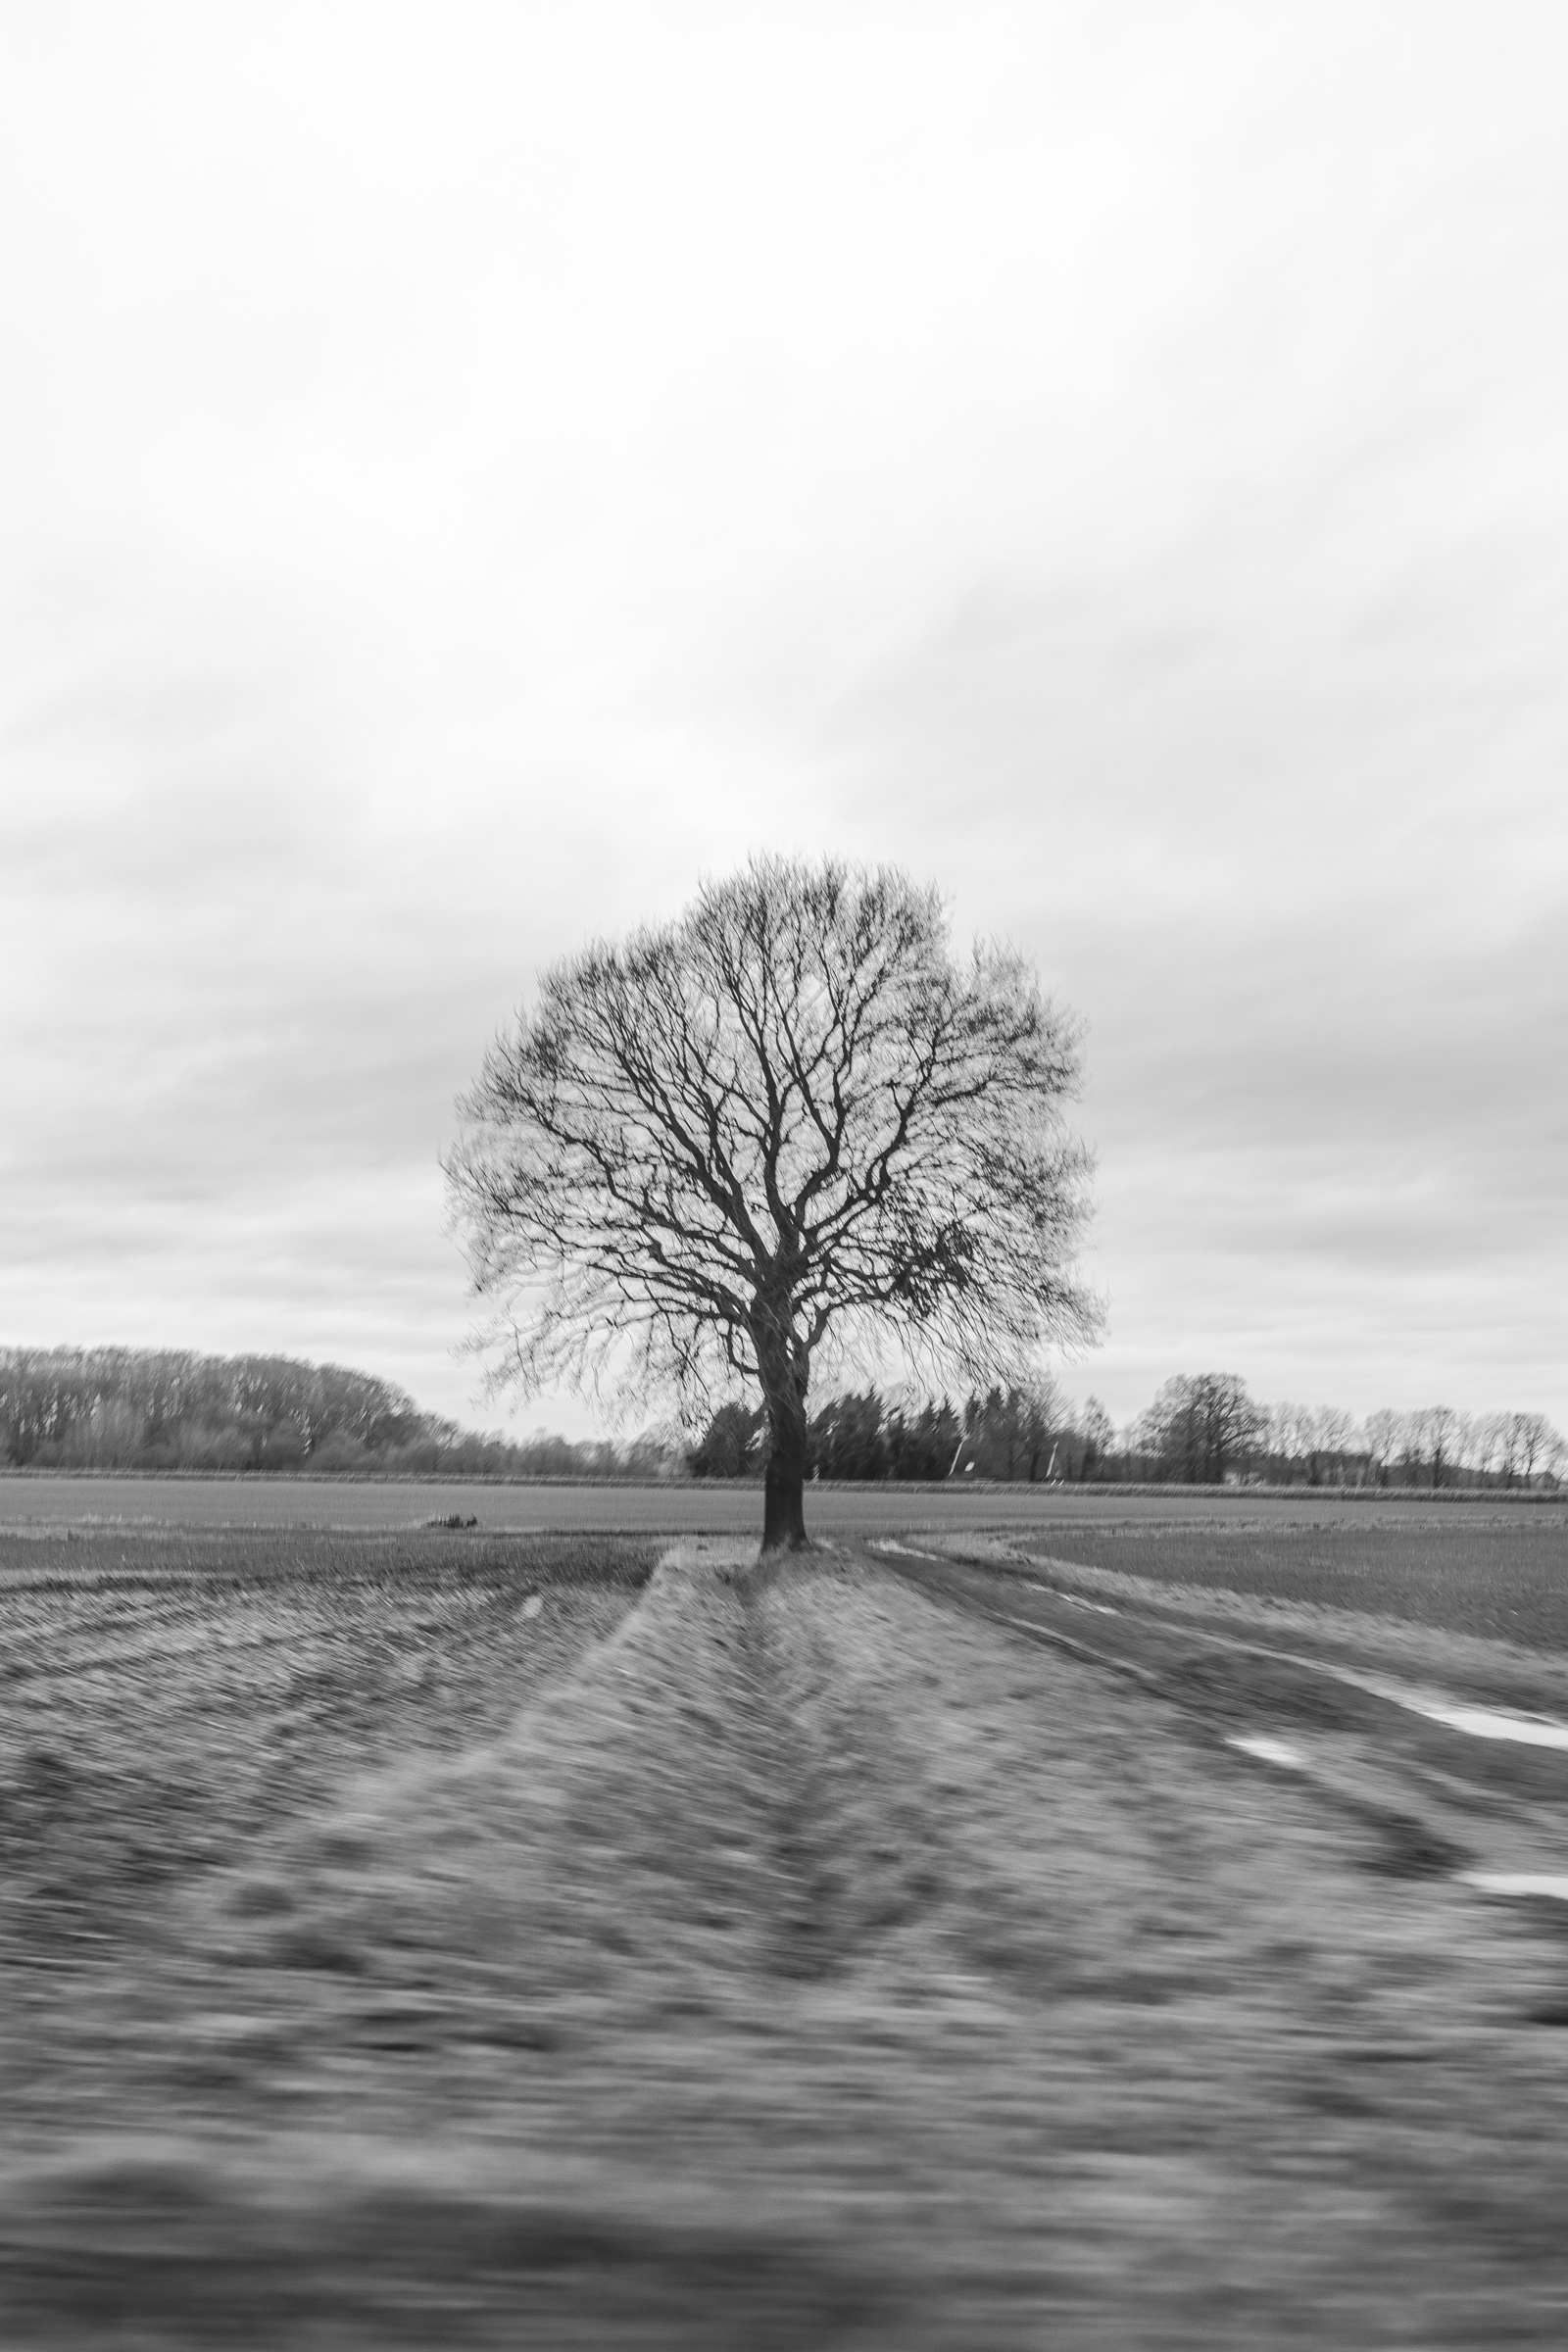 A tree standing in a field with radial motion blur around it.